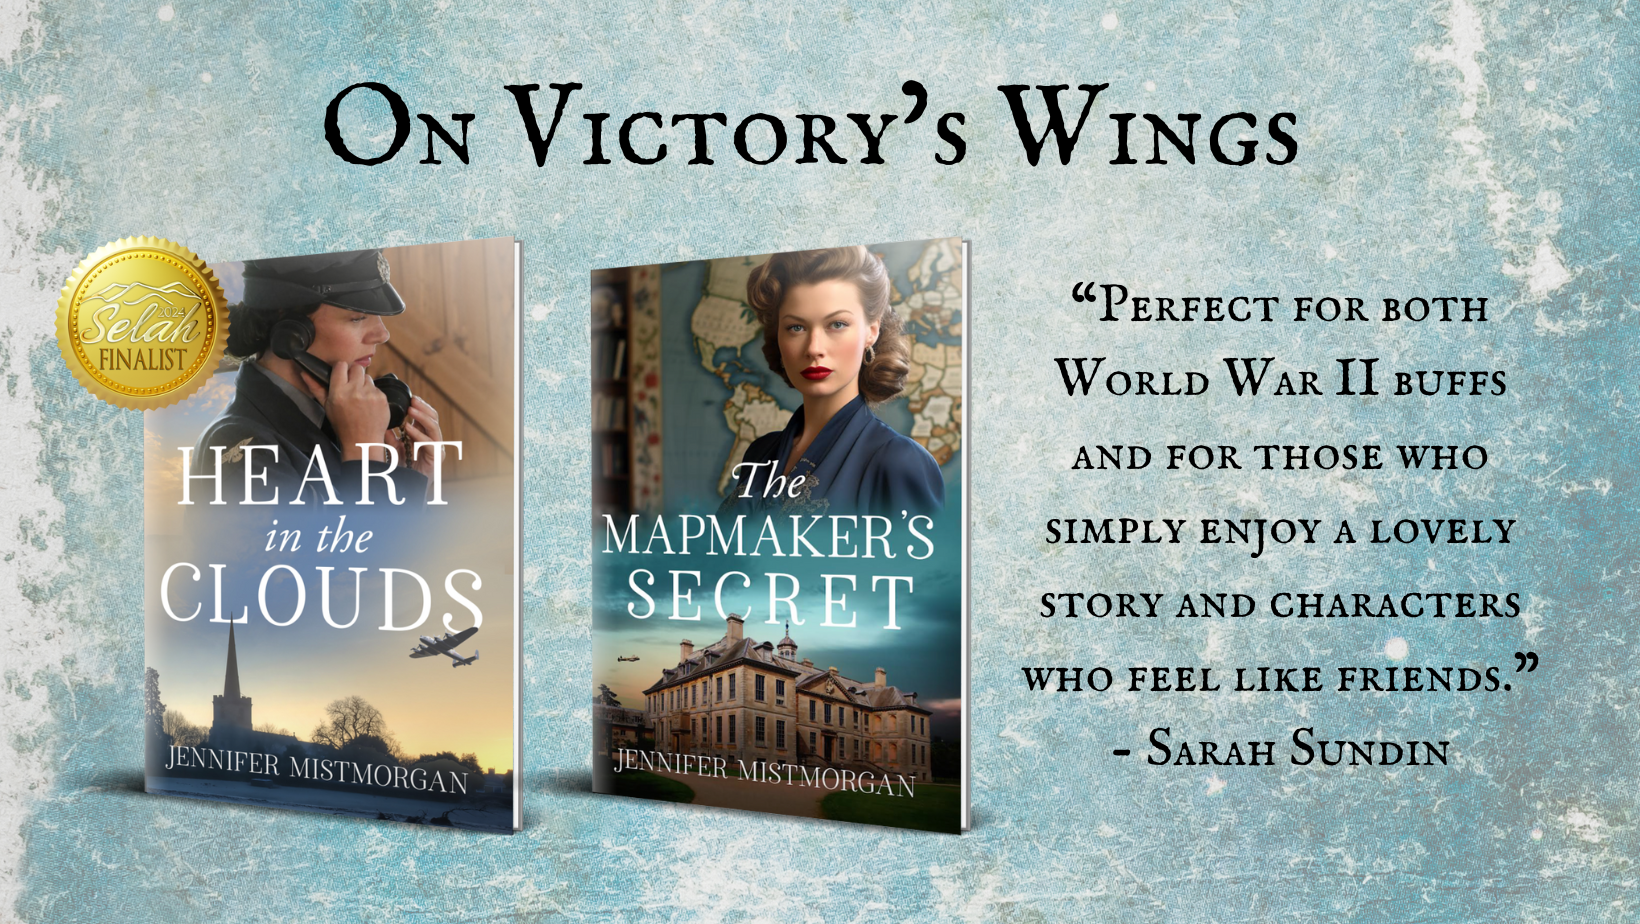 Two WWII book covers and a quote; “Perfect for both World War II buffs and for those who simply enjoy a lovely story and characters who feel like friends.” - Sarah Sundin